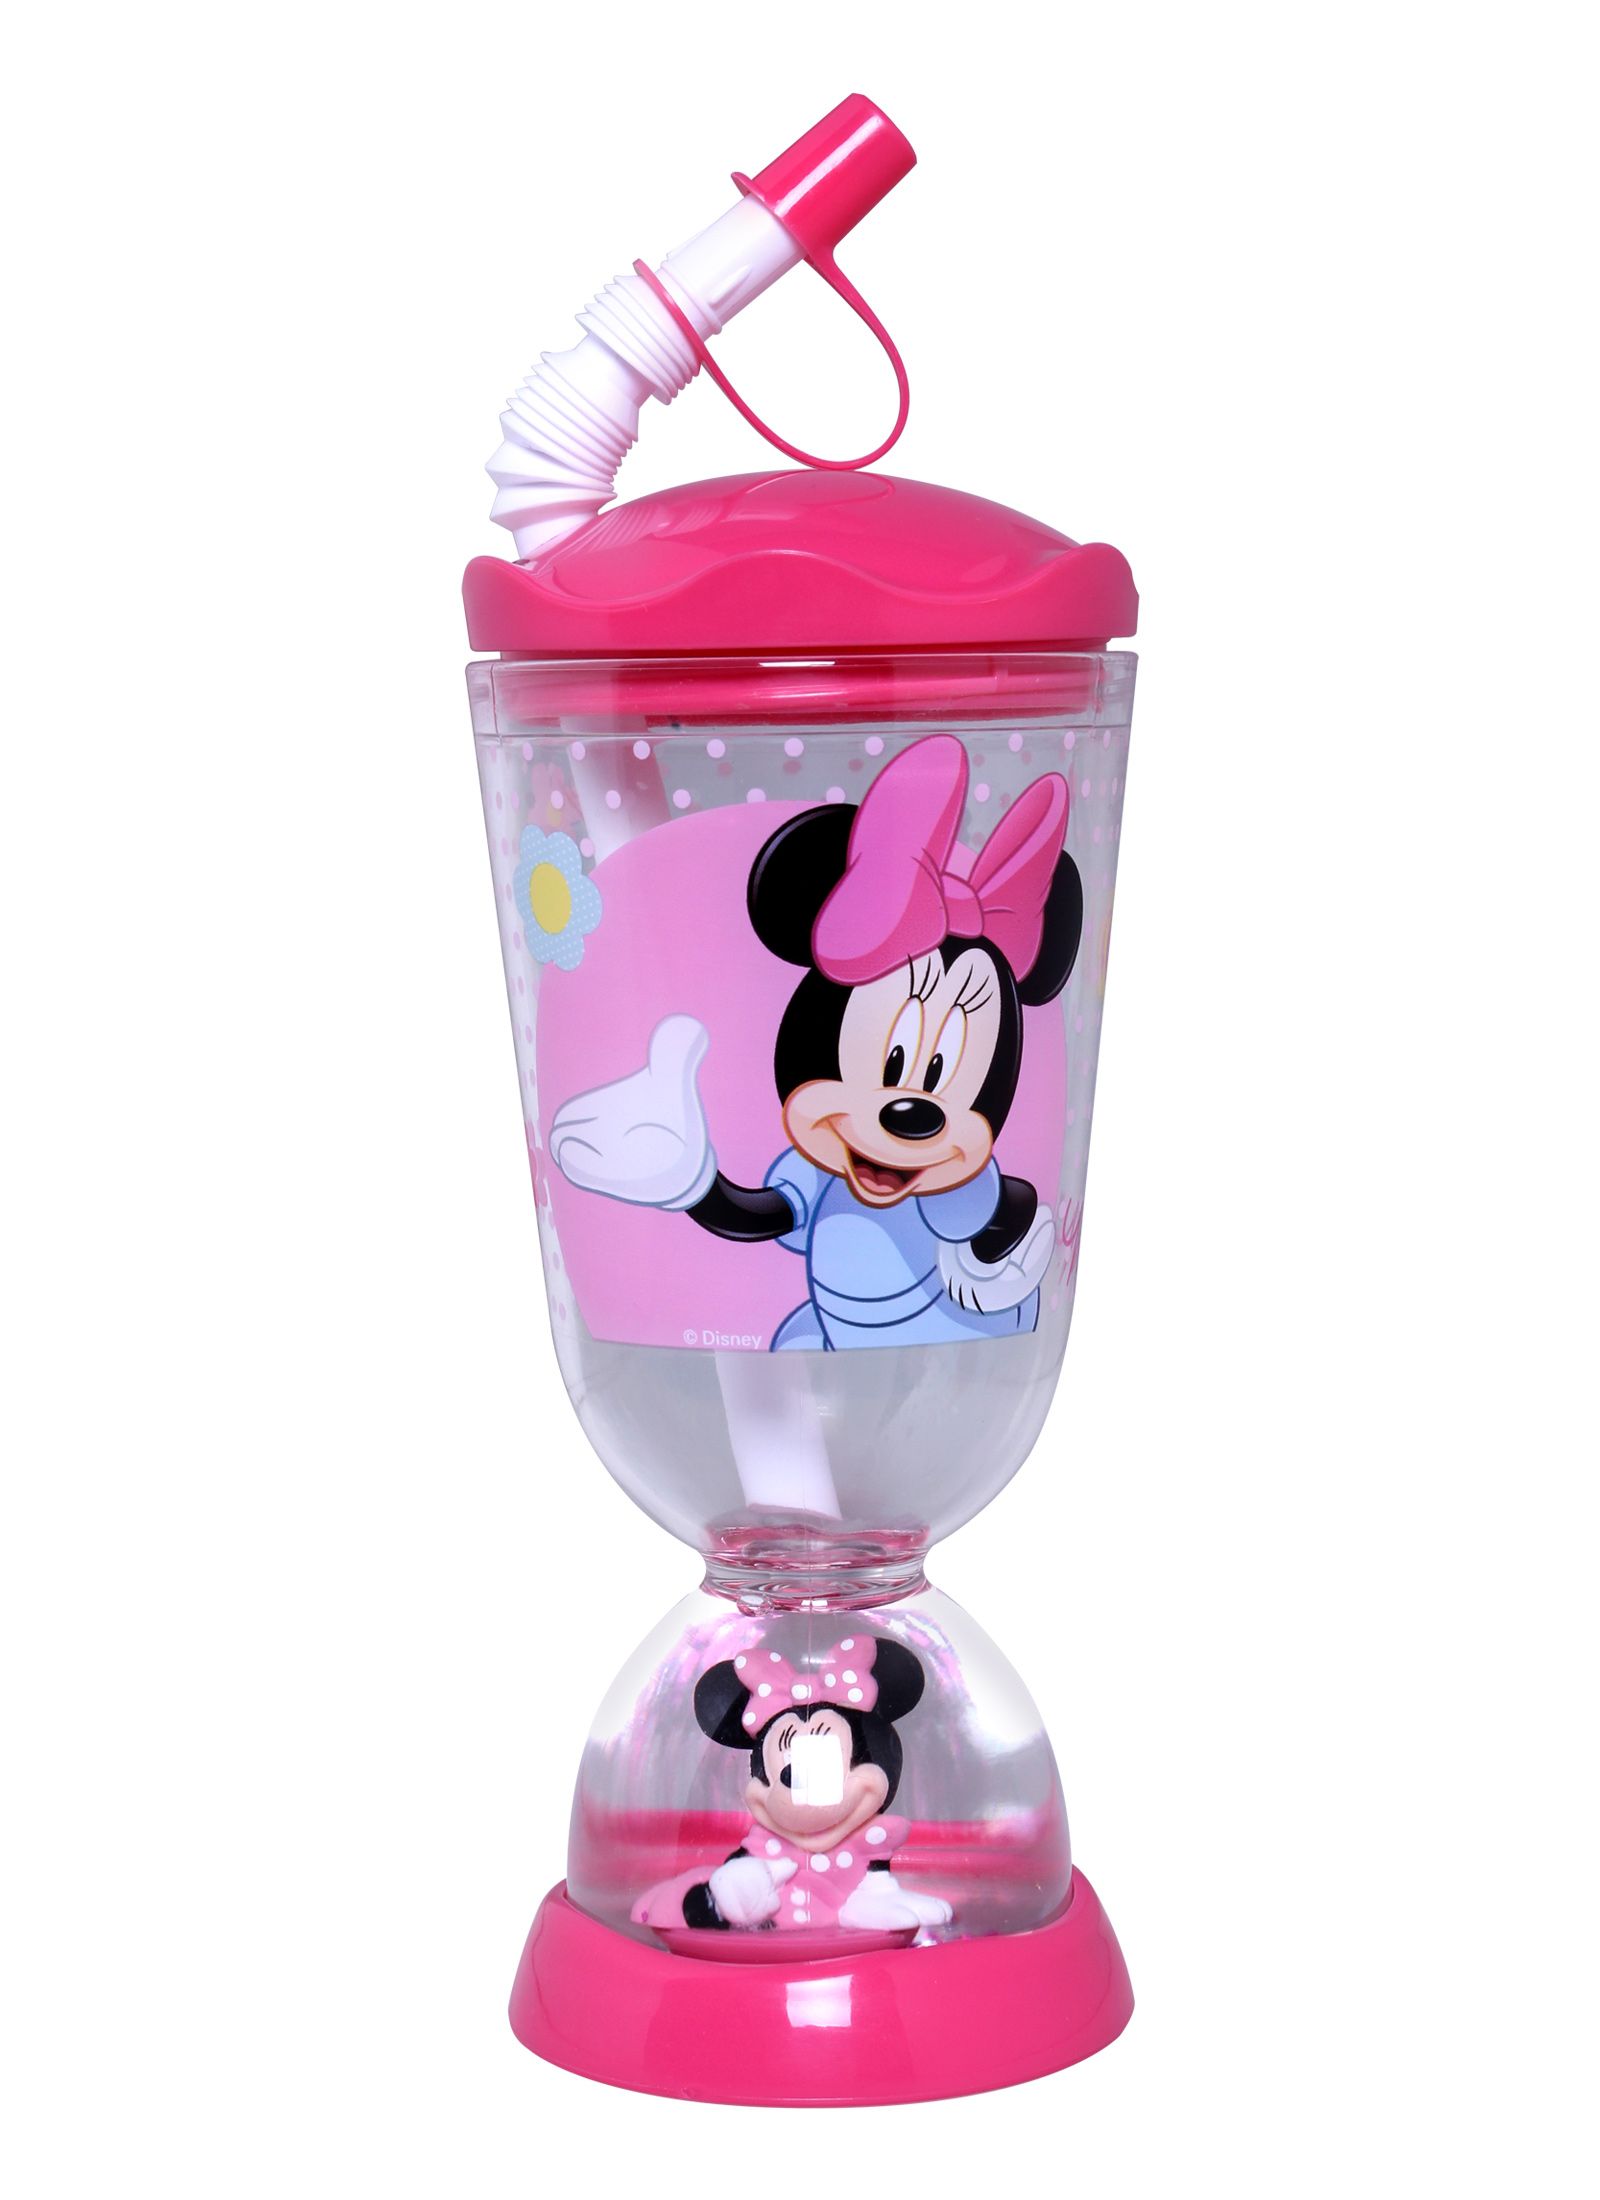 Dome Tumbler - Minnie Mouse